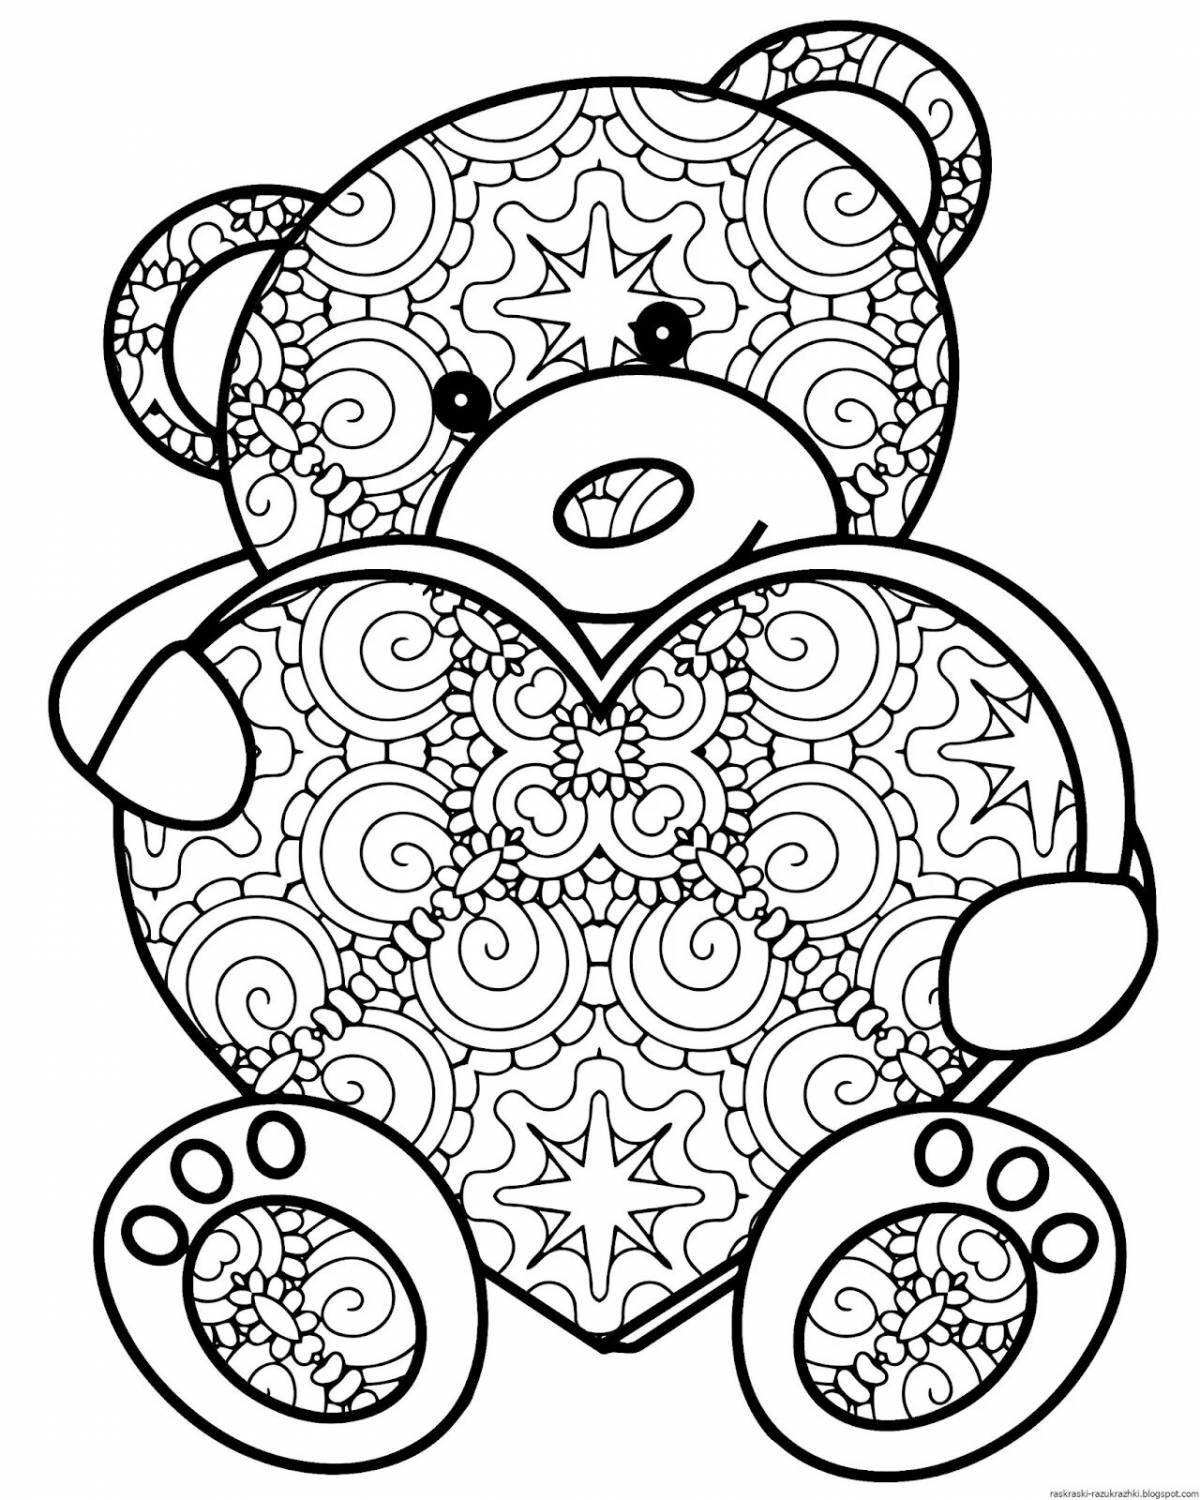 Coloring book colorful-dream for 13 year olds